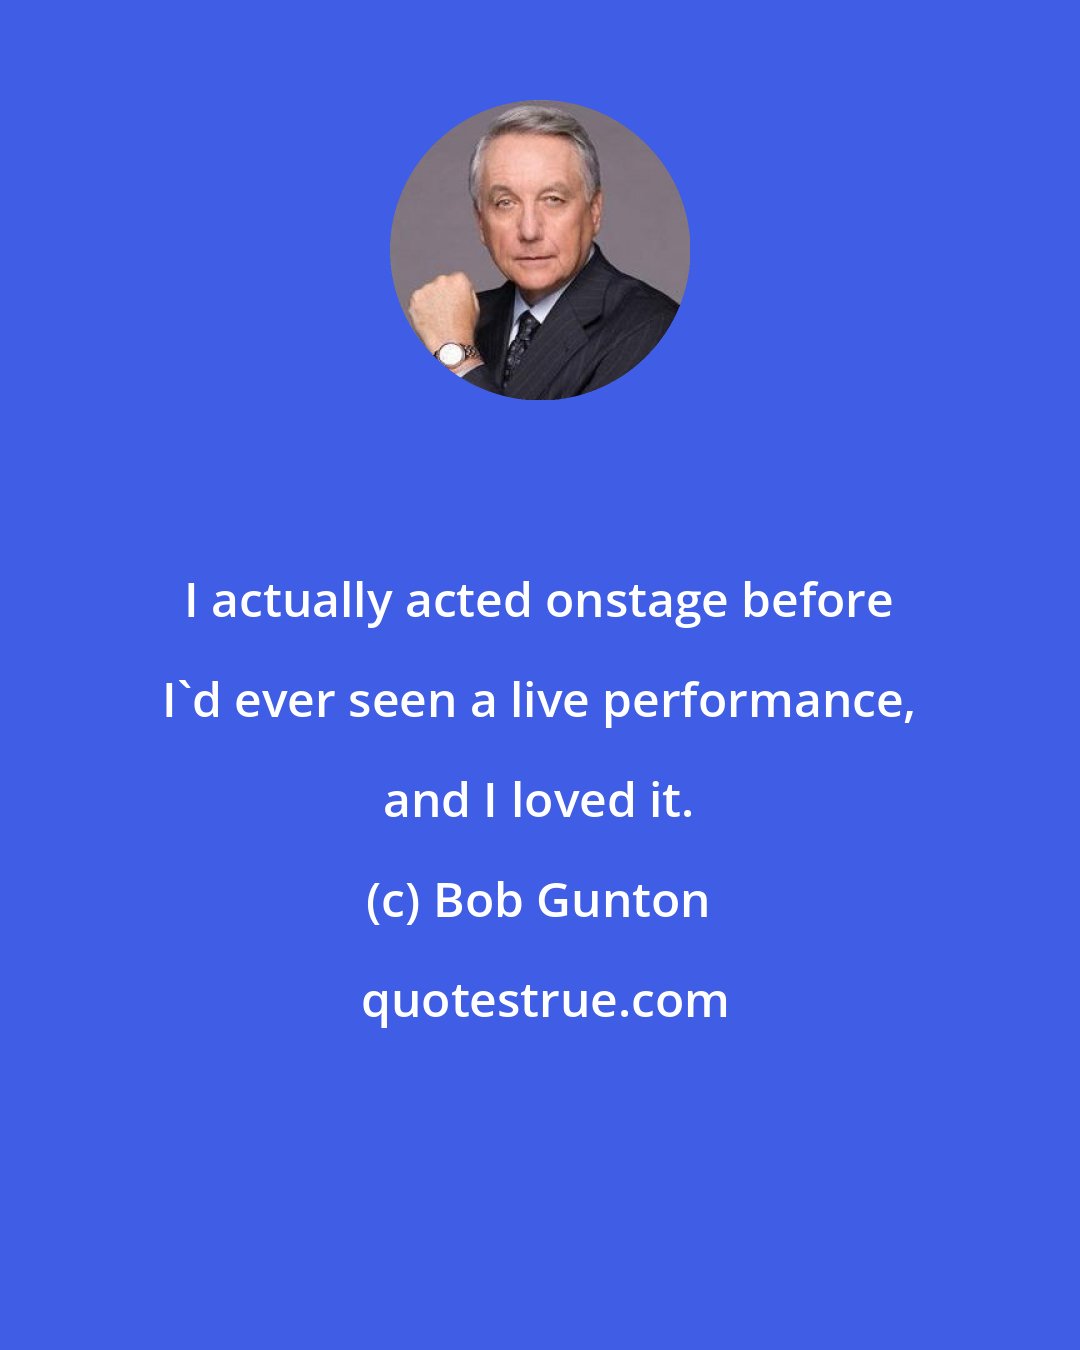 Bob Gunton: I actually acted onstage before I'd ever seen a live performance, and I loved it.